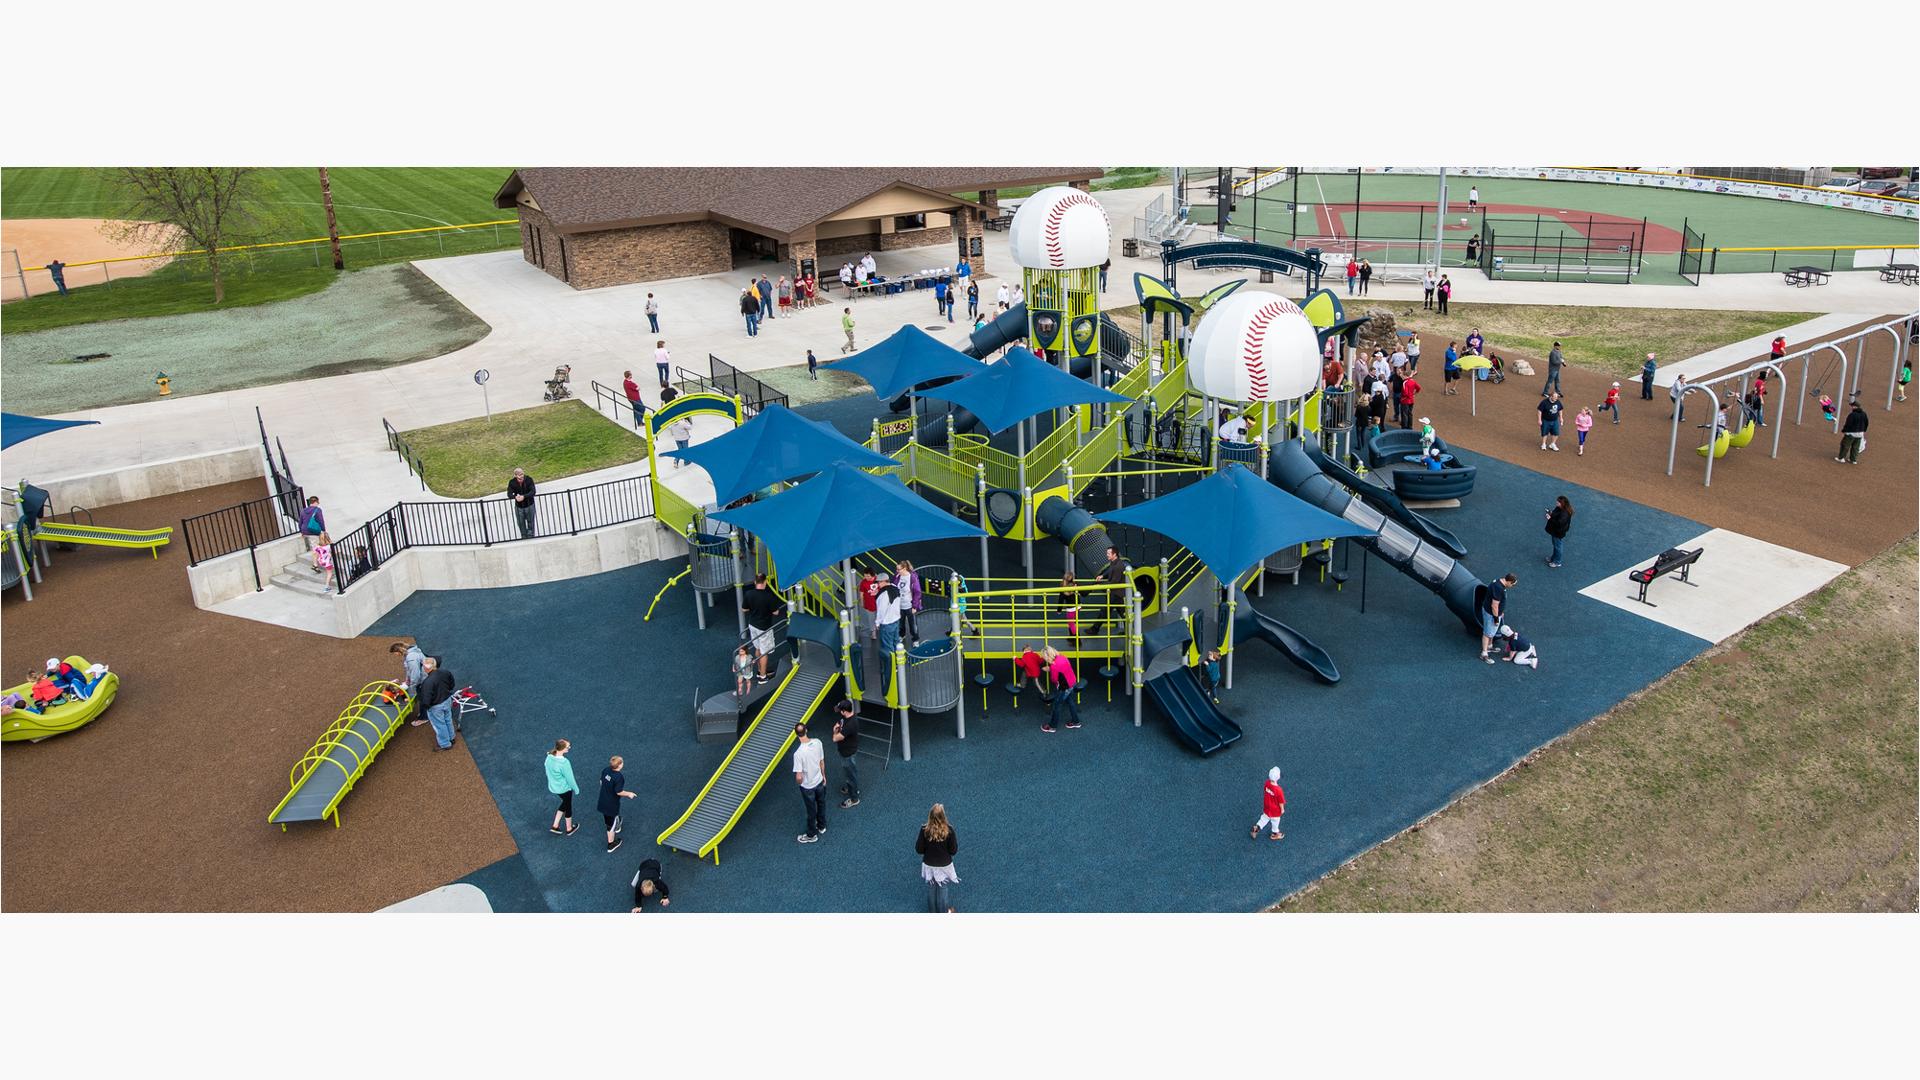 Lots of families playing on an inclusive, fully-ramped and accessible playground with four blue shade structures and two baseball roofs.